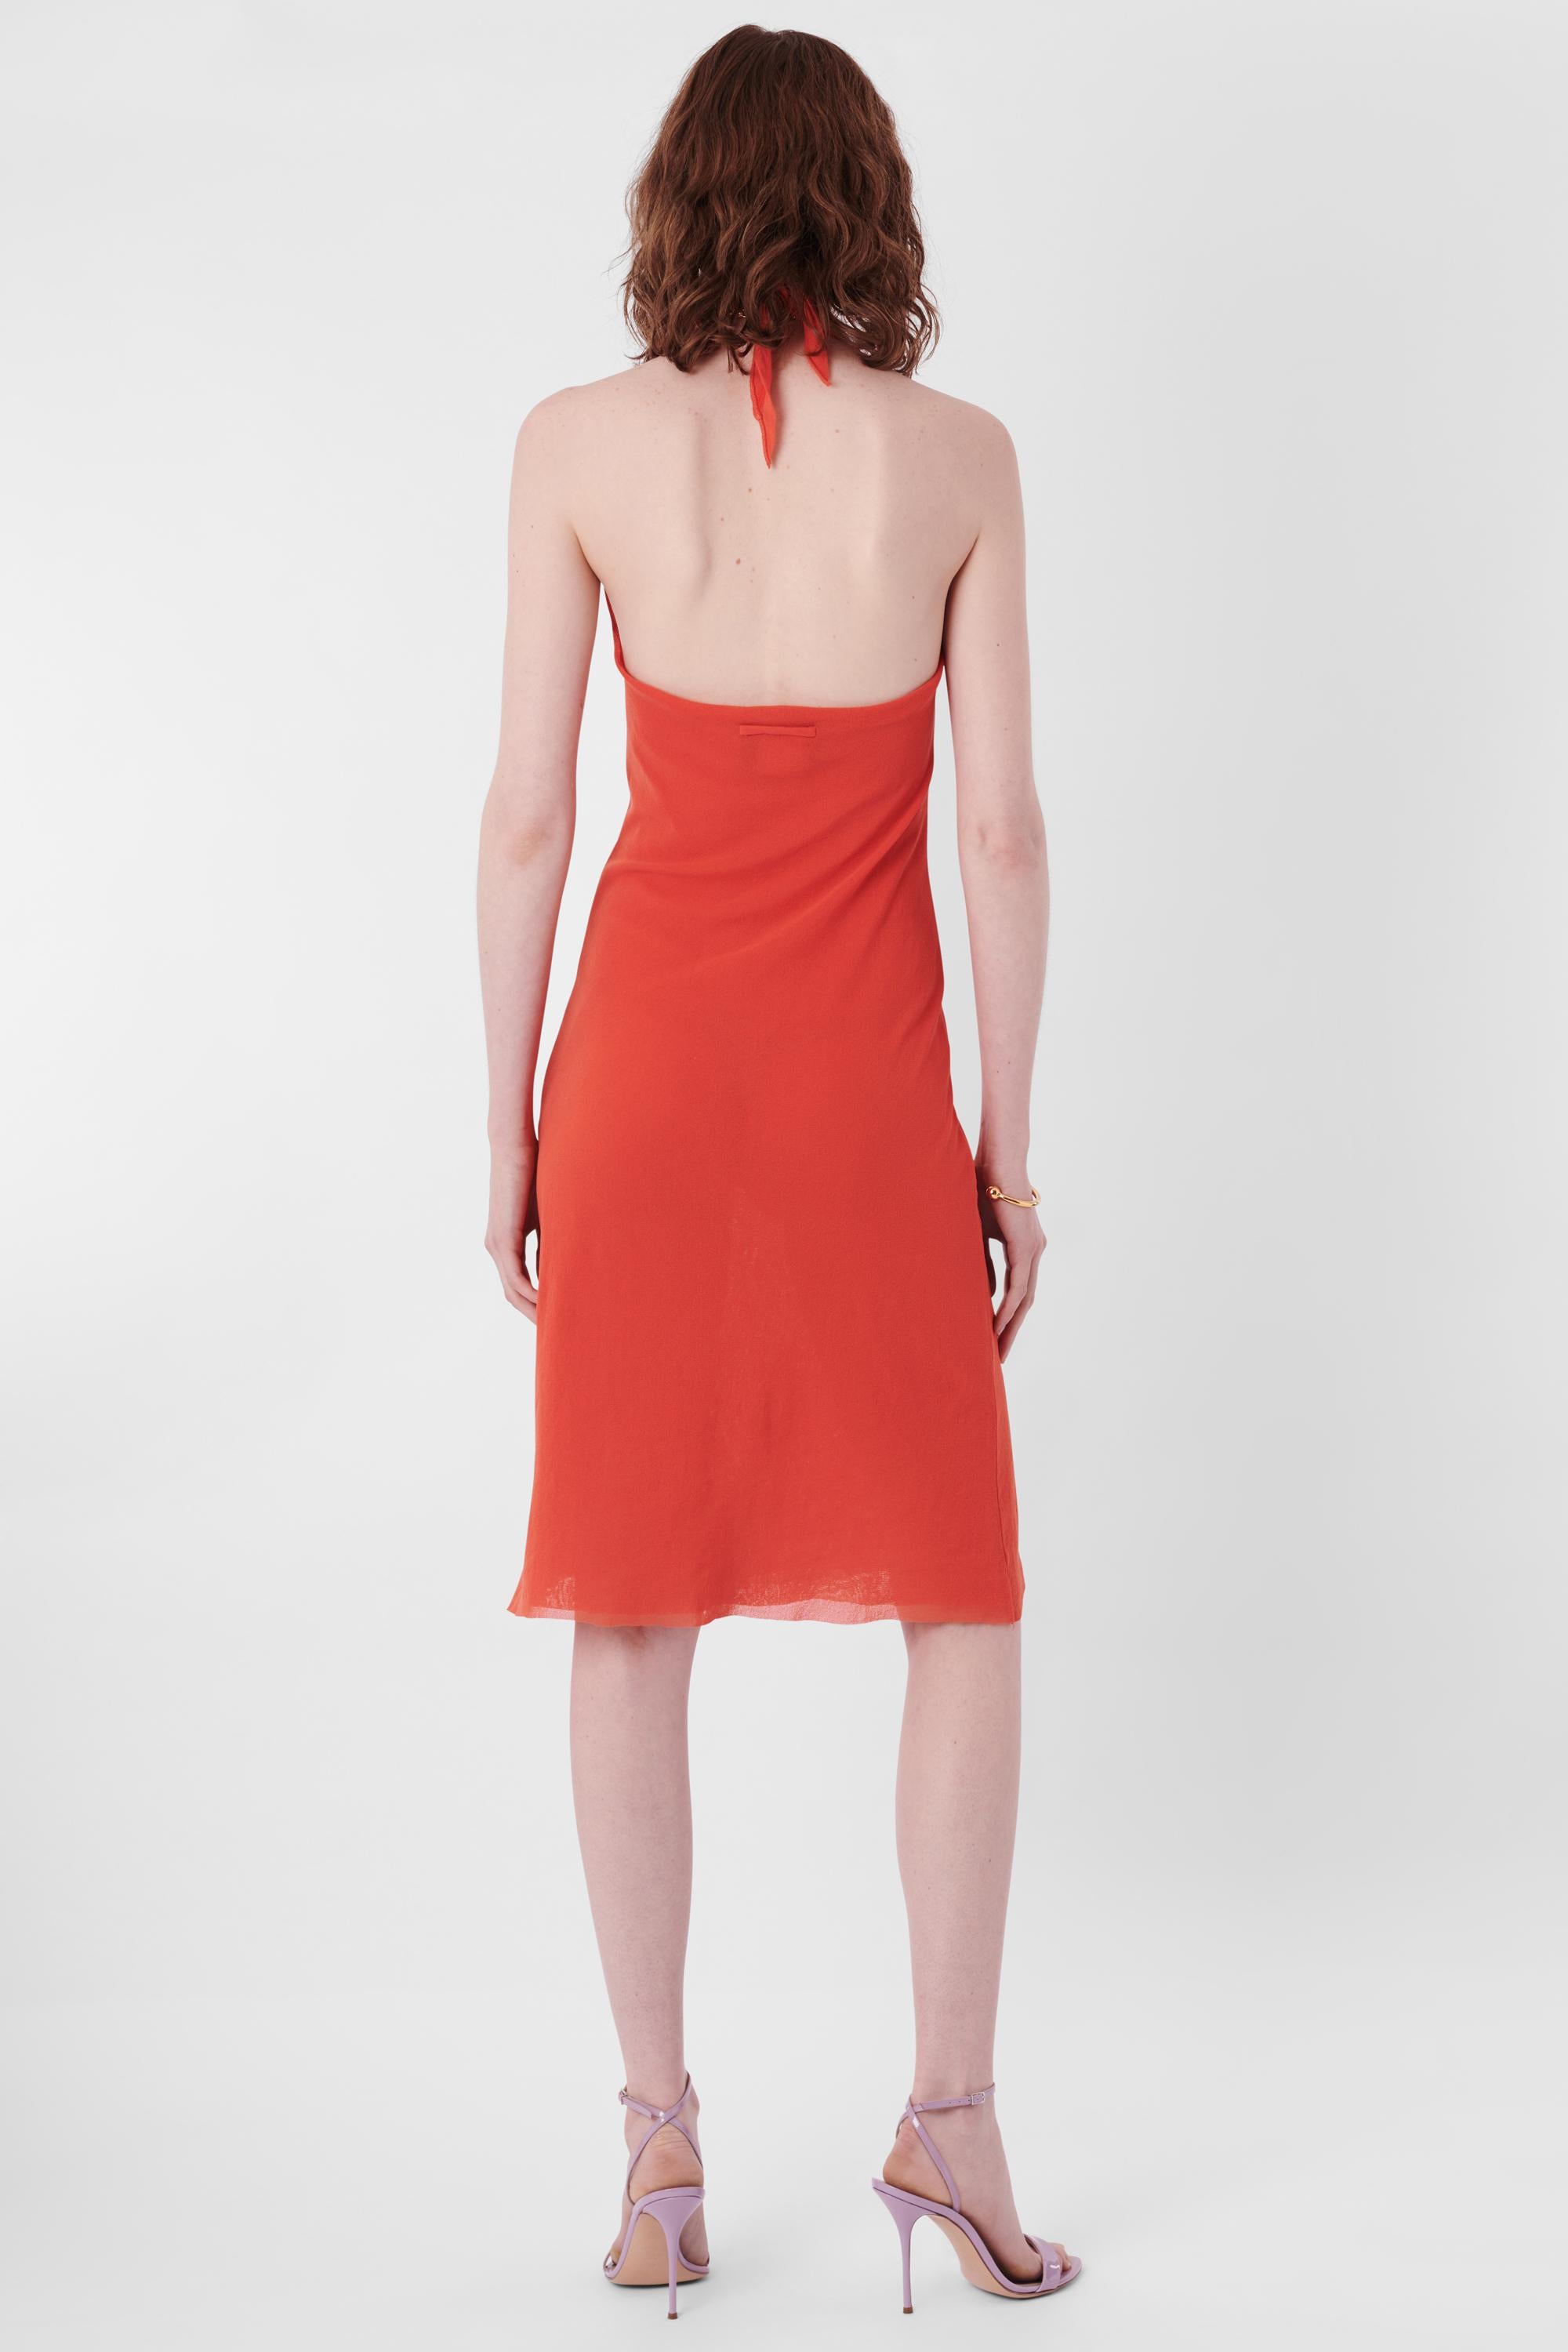 Vintage Jean Paul Gaultier 2000's Coral Halter Neck Mesh Dress. Features Halter neck design, straight fit in midi length. In excellent vintage condition.

Label size: Small
Modern size: UK: 8 to 10, US: 2 to 4, EU: 36 to 38
Measurements when laid